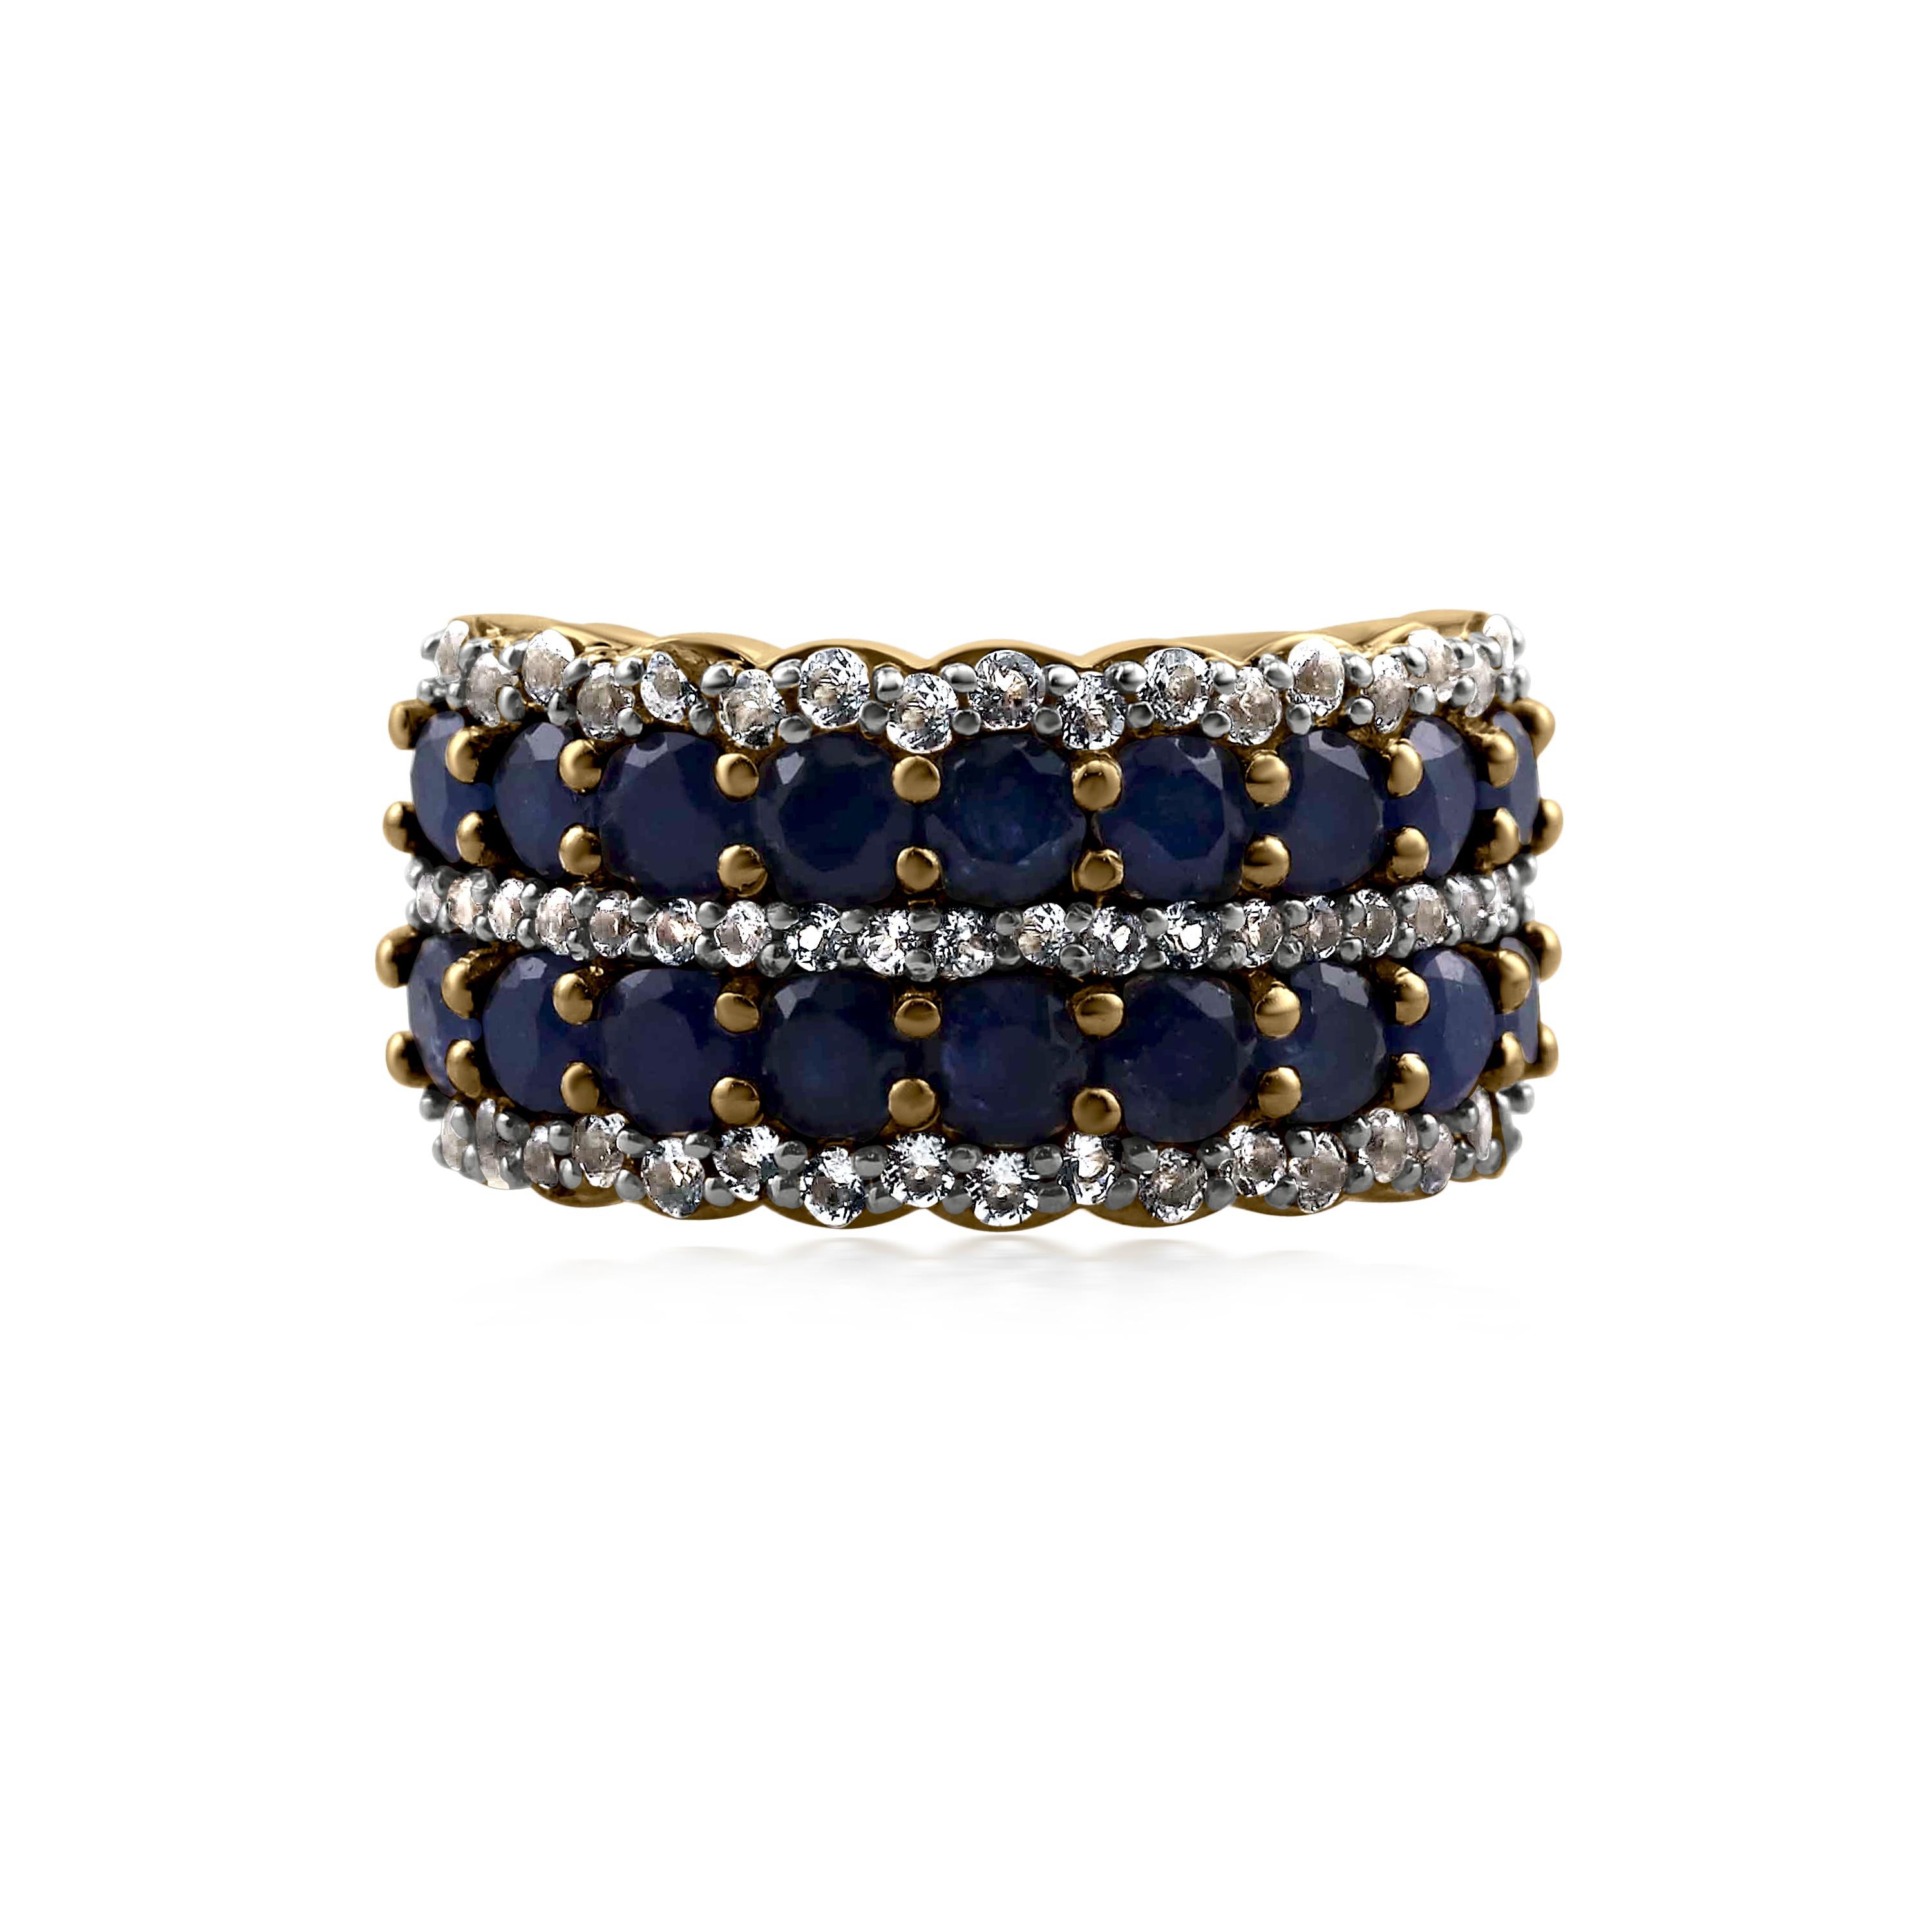 When it comes to your jewelry collection, the dazzling double-row design of this Gemistry gemstone band ring is destined for greatness. This dome-shaped eternity band ring features two rows of prong-set 3.35 carat Blue sapphire accented on each end